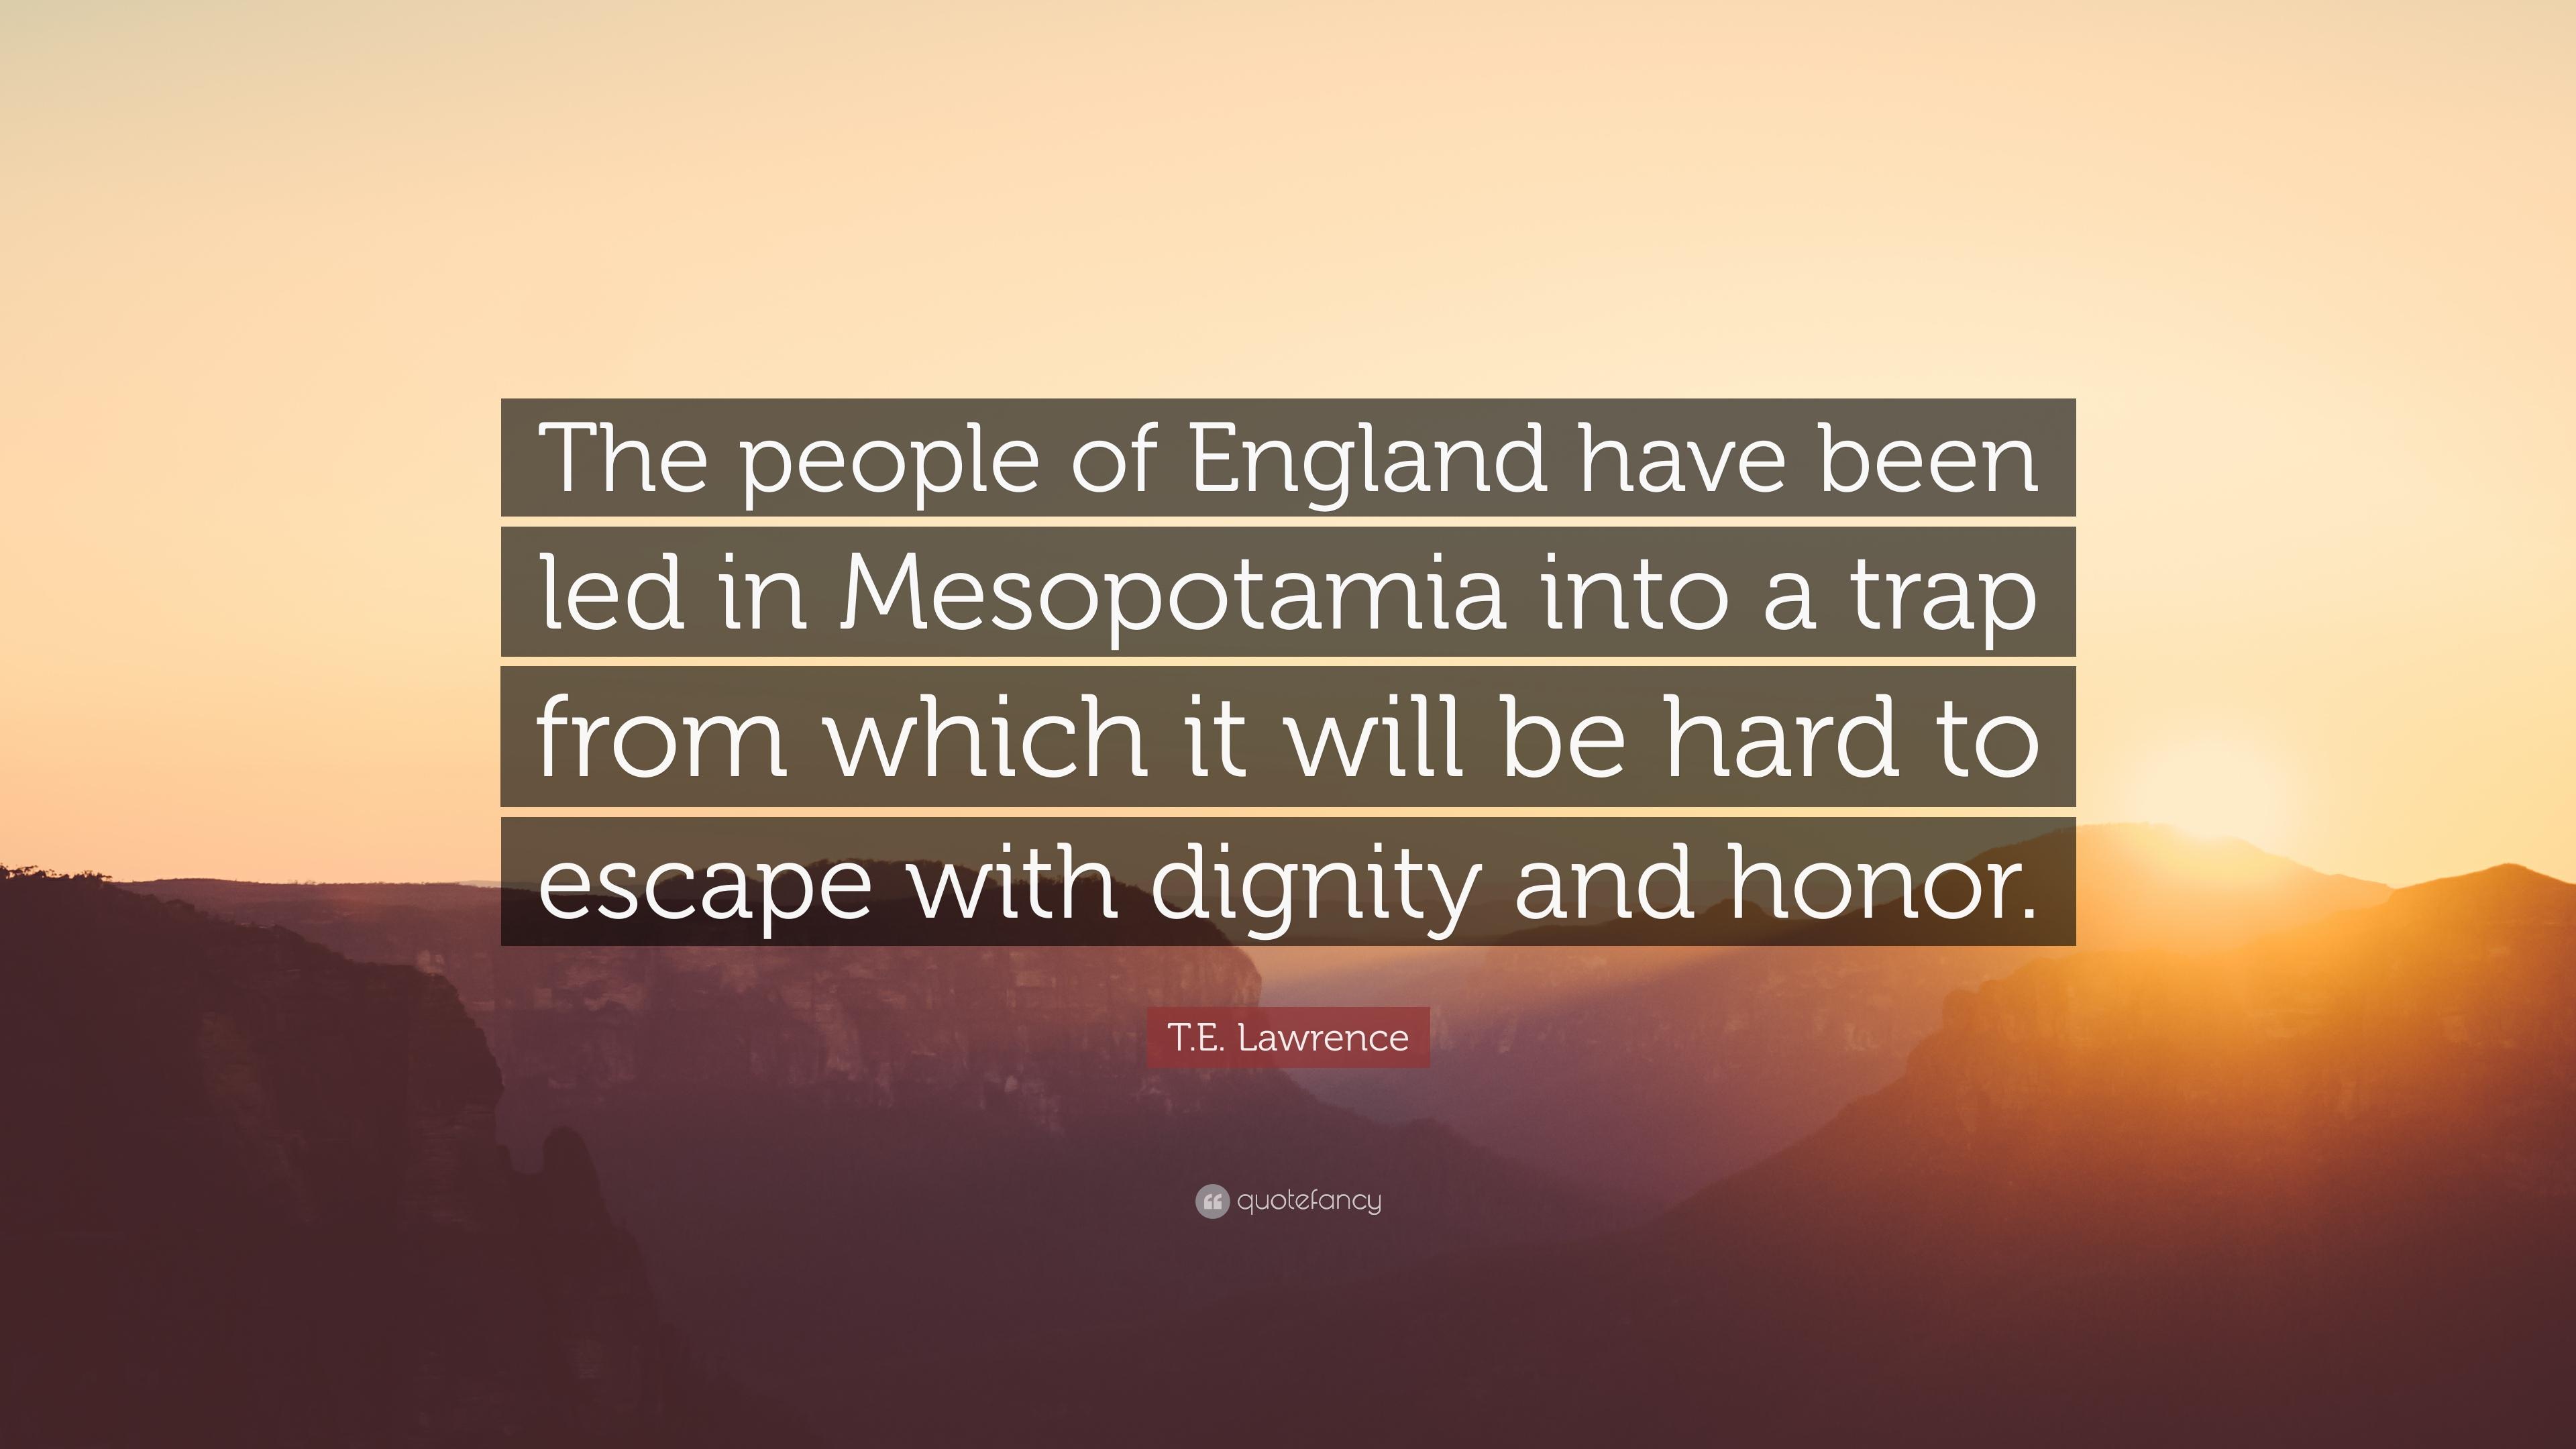 T.E. Lawrence Quote: “The people of England have been led